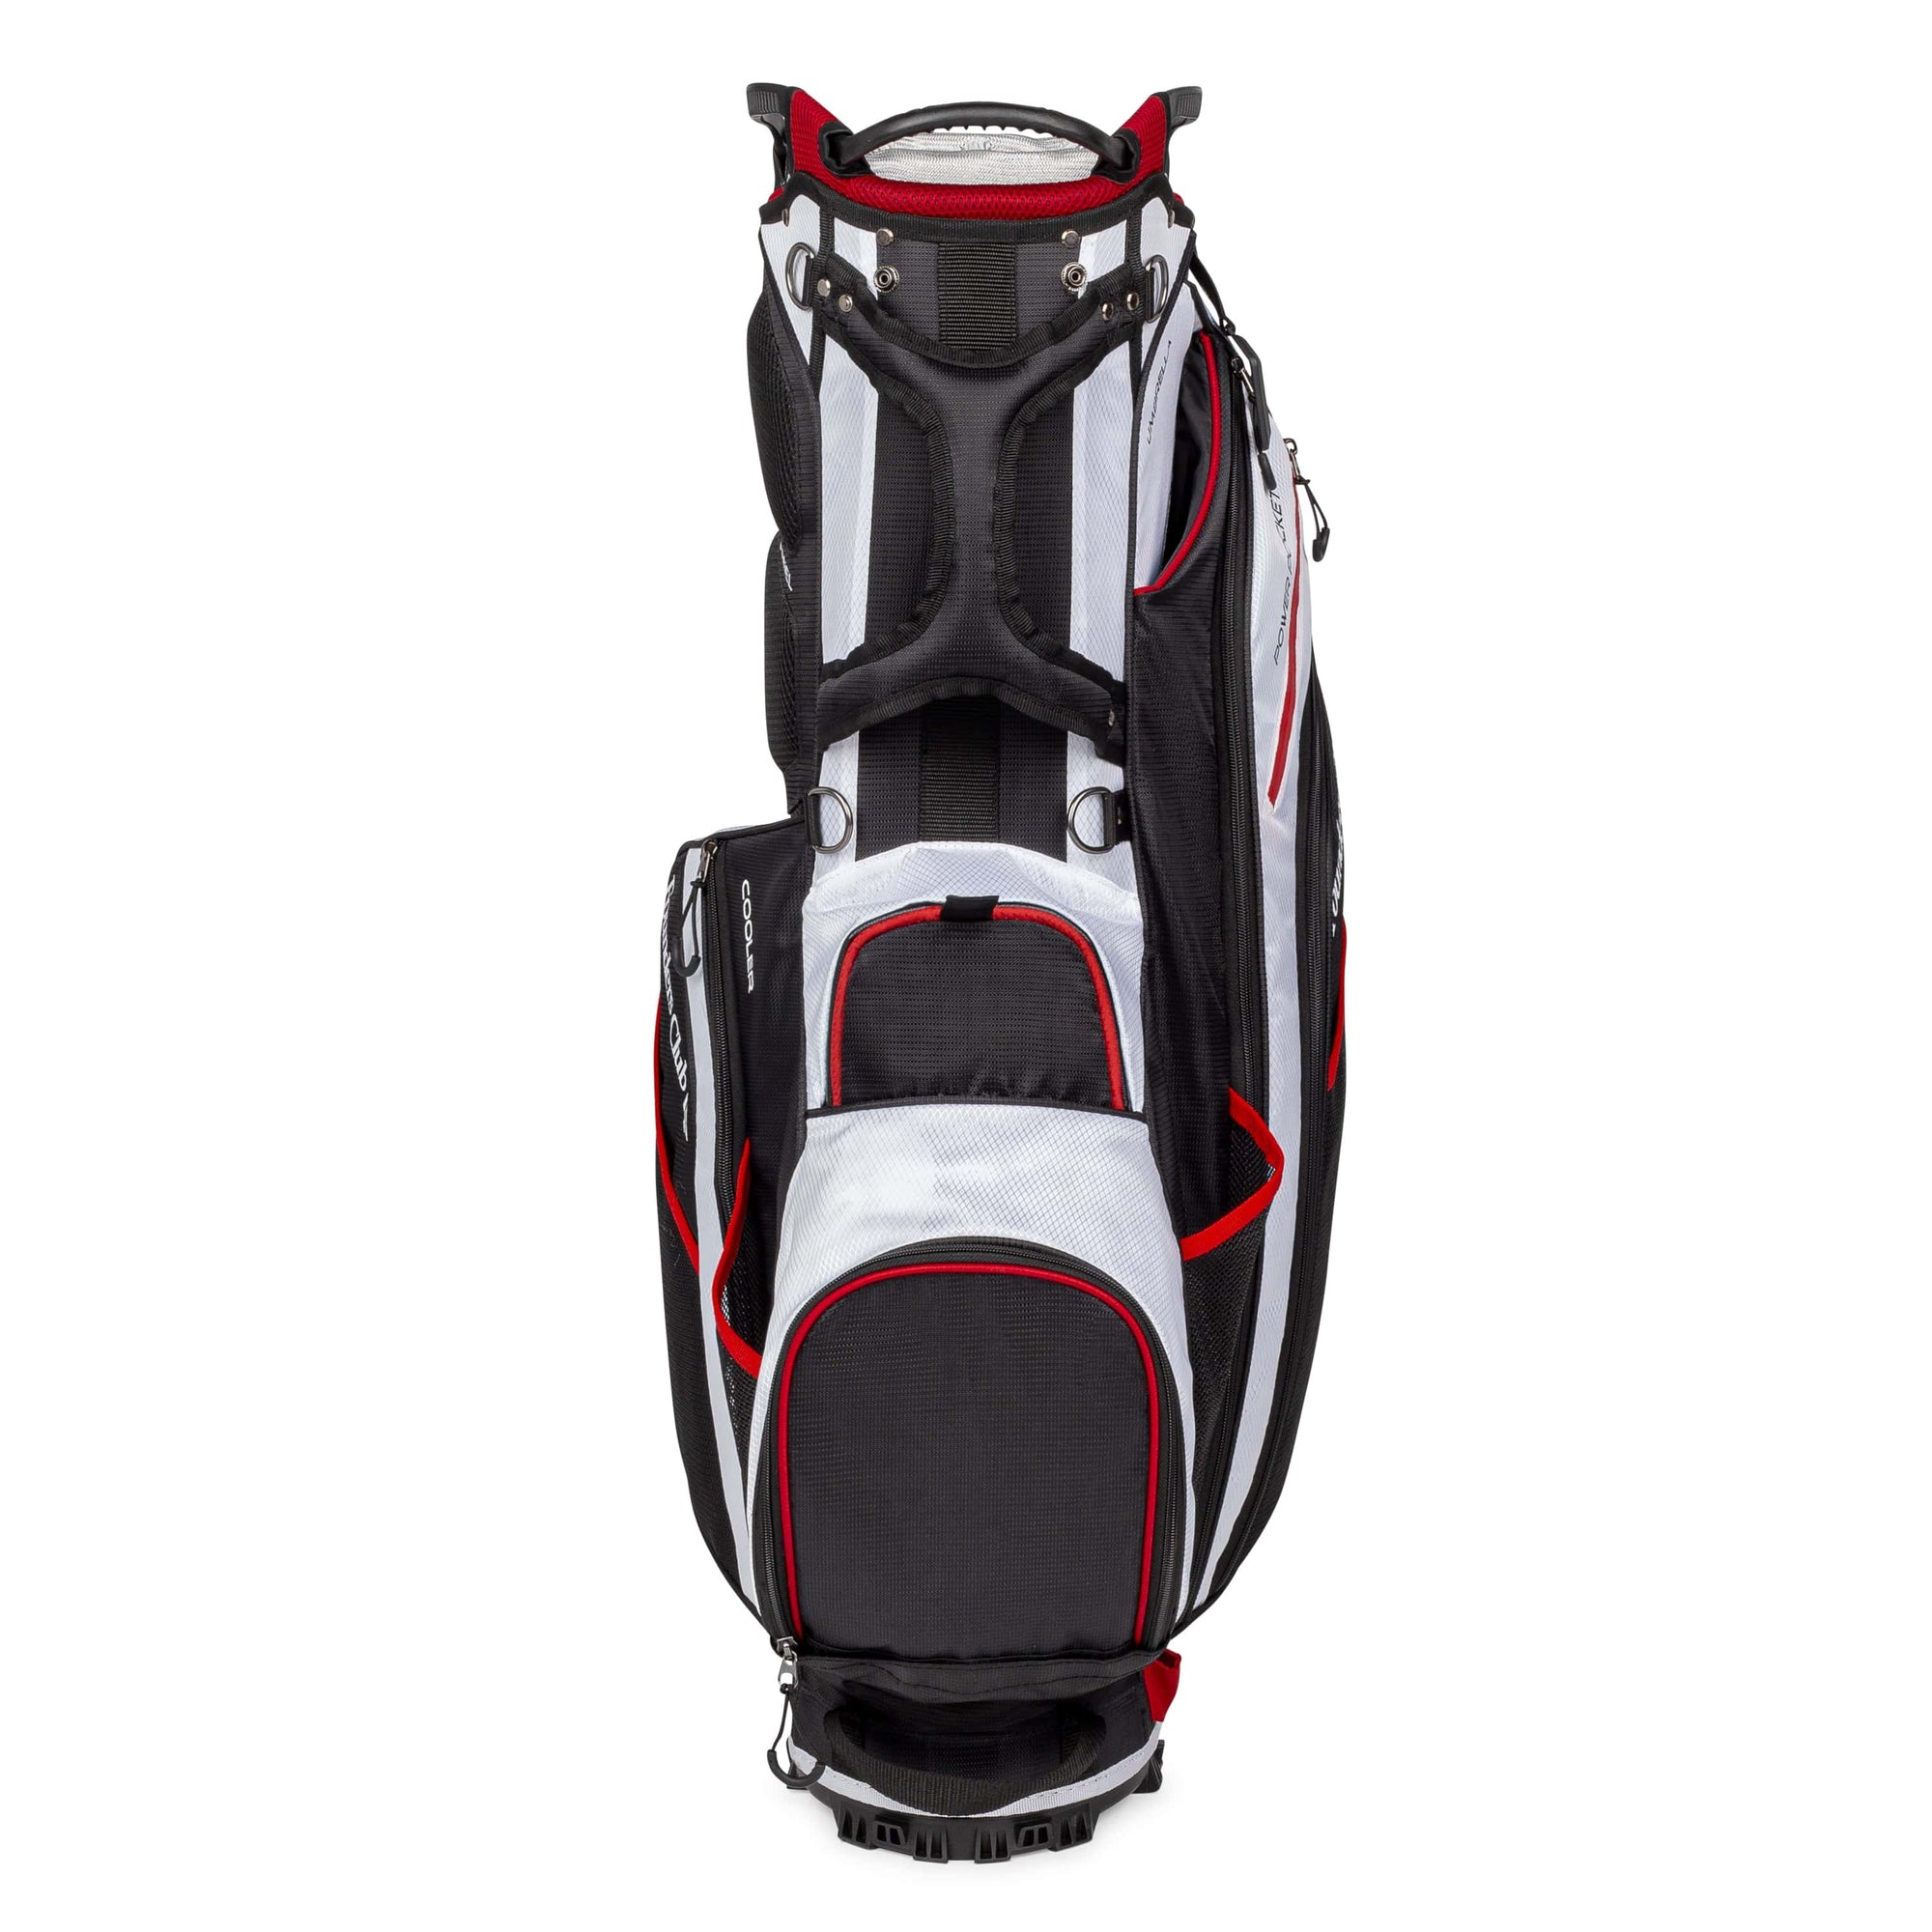 Founders Club Golf Stand Bag for Walking Carrying 14 Way